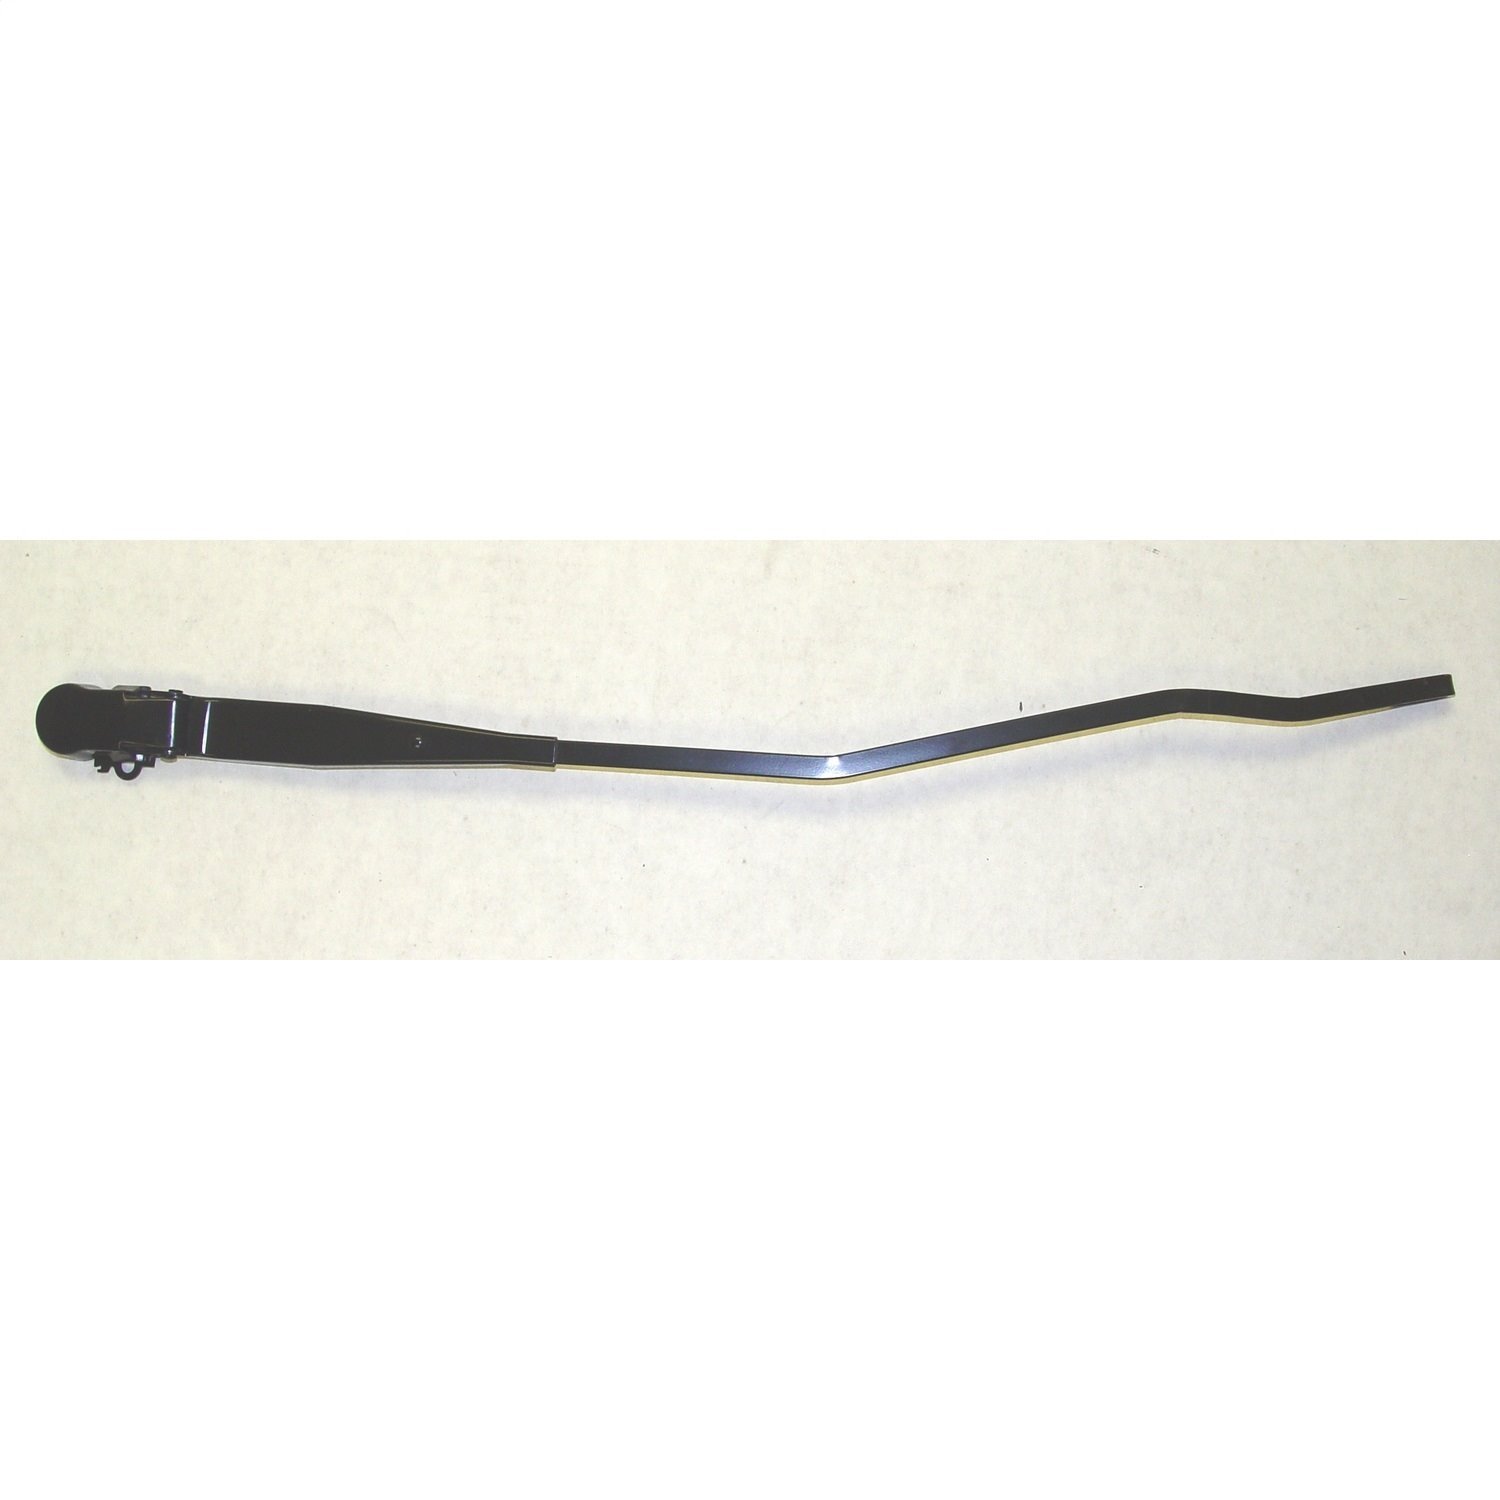 Replacement windshield wiper arm from Omix-ADA, Fits left or right side on 93-98 Jeep Grand Cherokee ZJ